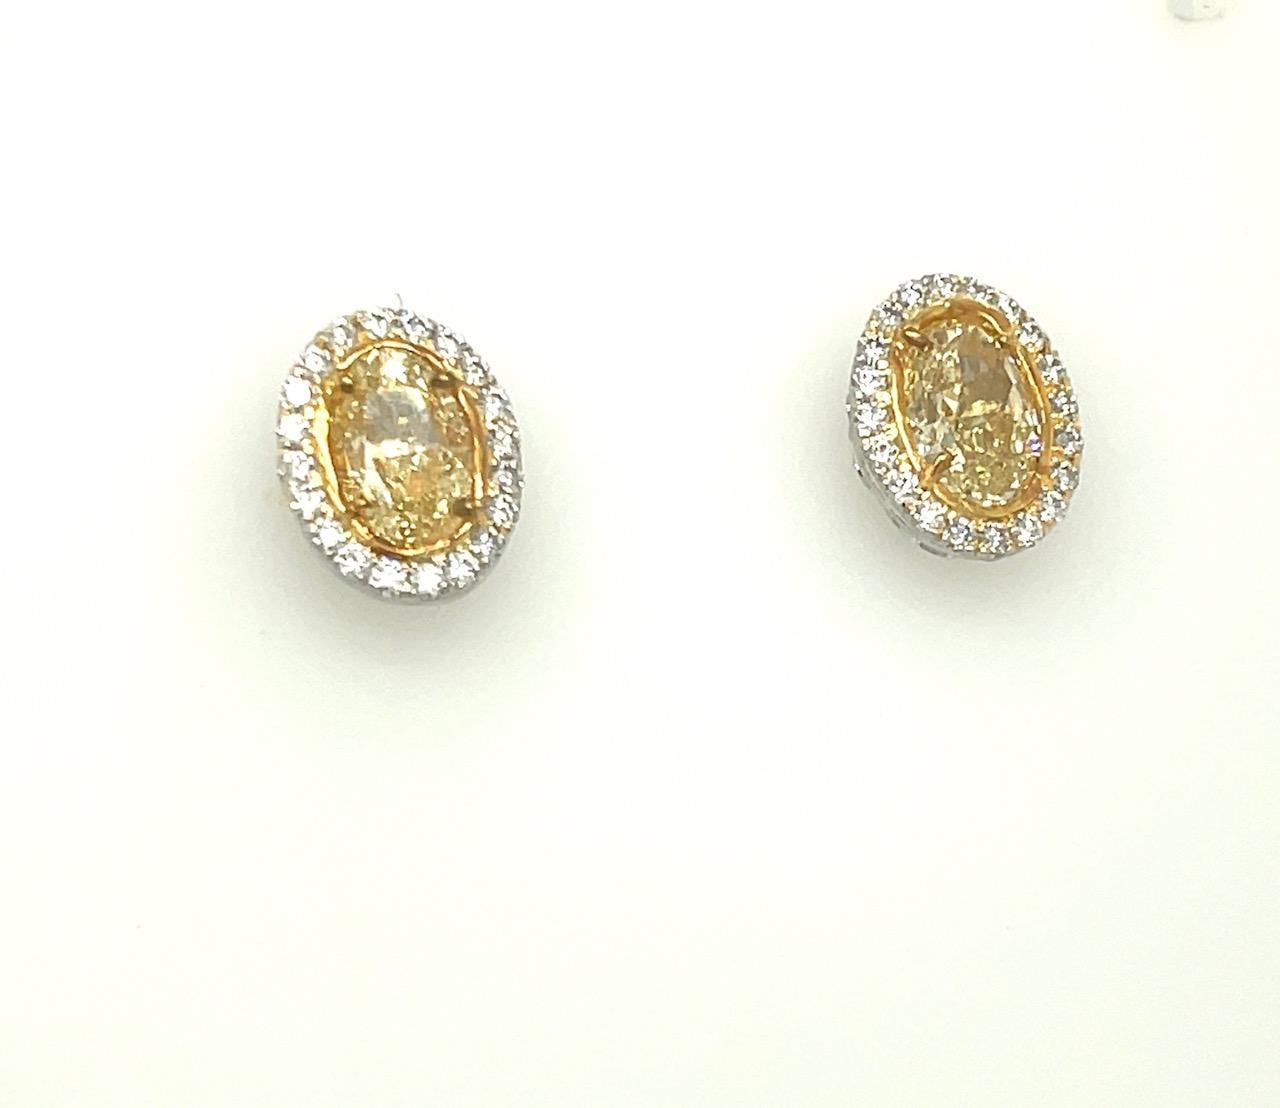 Oval Yellow Diamond Earrings 3.13 Carats GIA Certified Platinum / 18 KYG In New Condition For Sale In Beverly Hills, CA